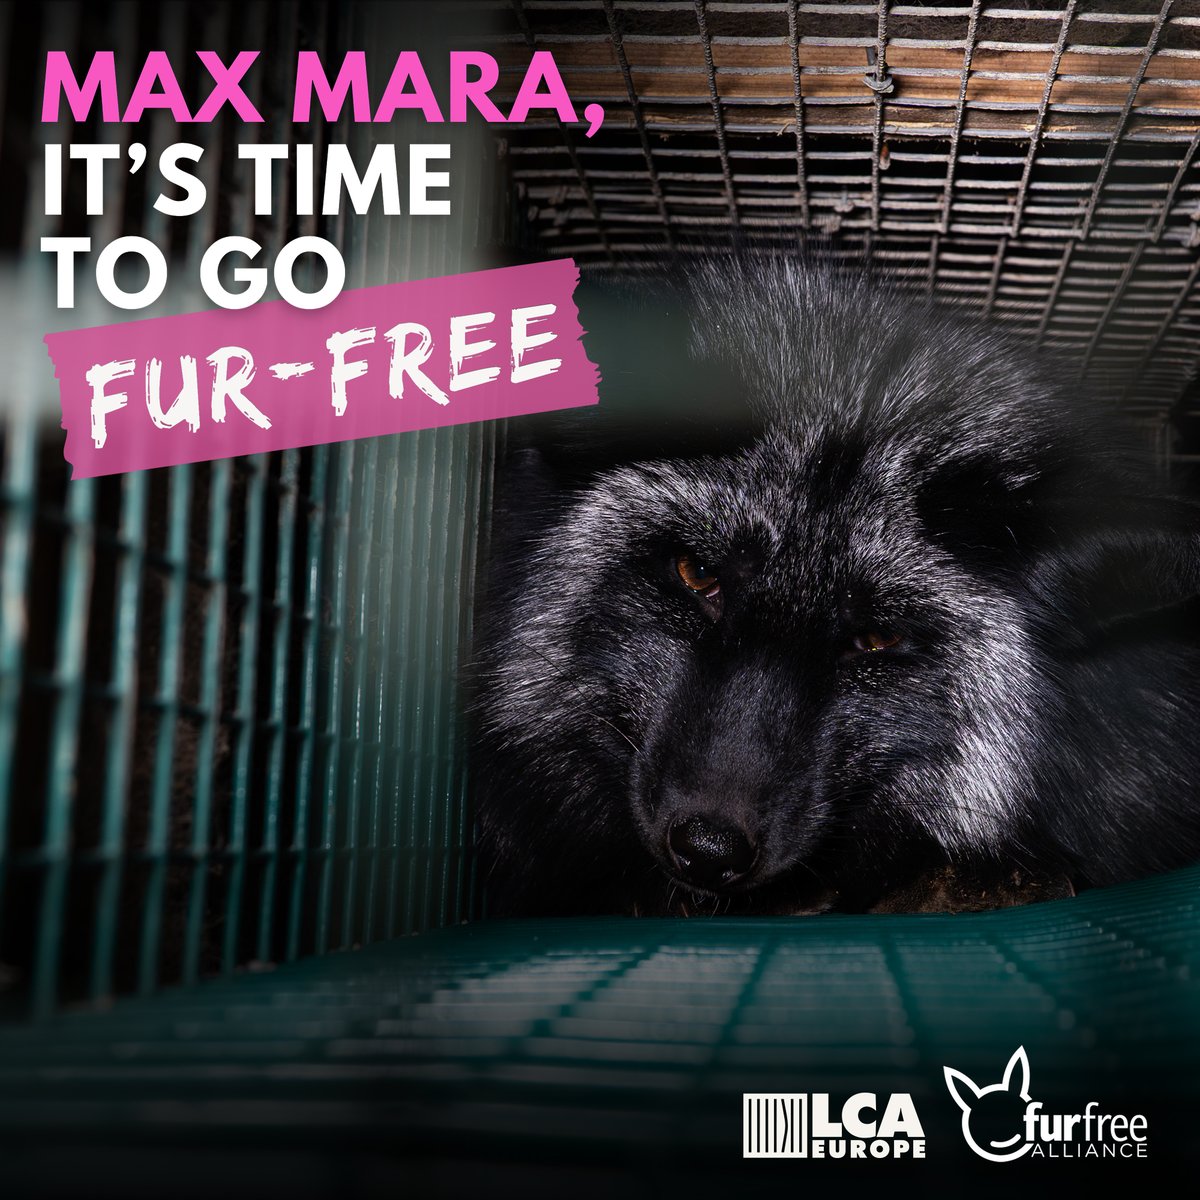 To make this happen, we need your help. Let’s raise our voices for a #FurFreeMaxMara! Together, we can make a difference! Tell @MaxMara to go #furfree, by joining the #FurFreeMaxMara Hashtag, and by replying to their latest posts.